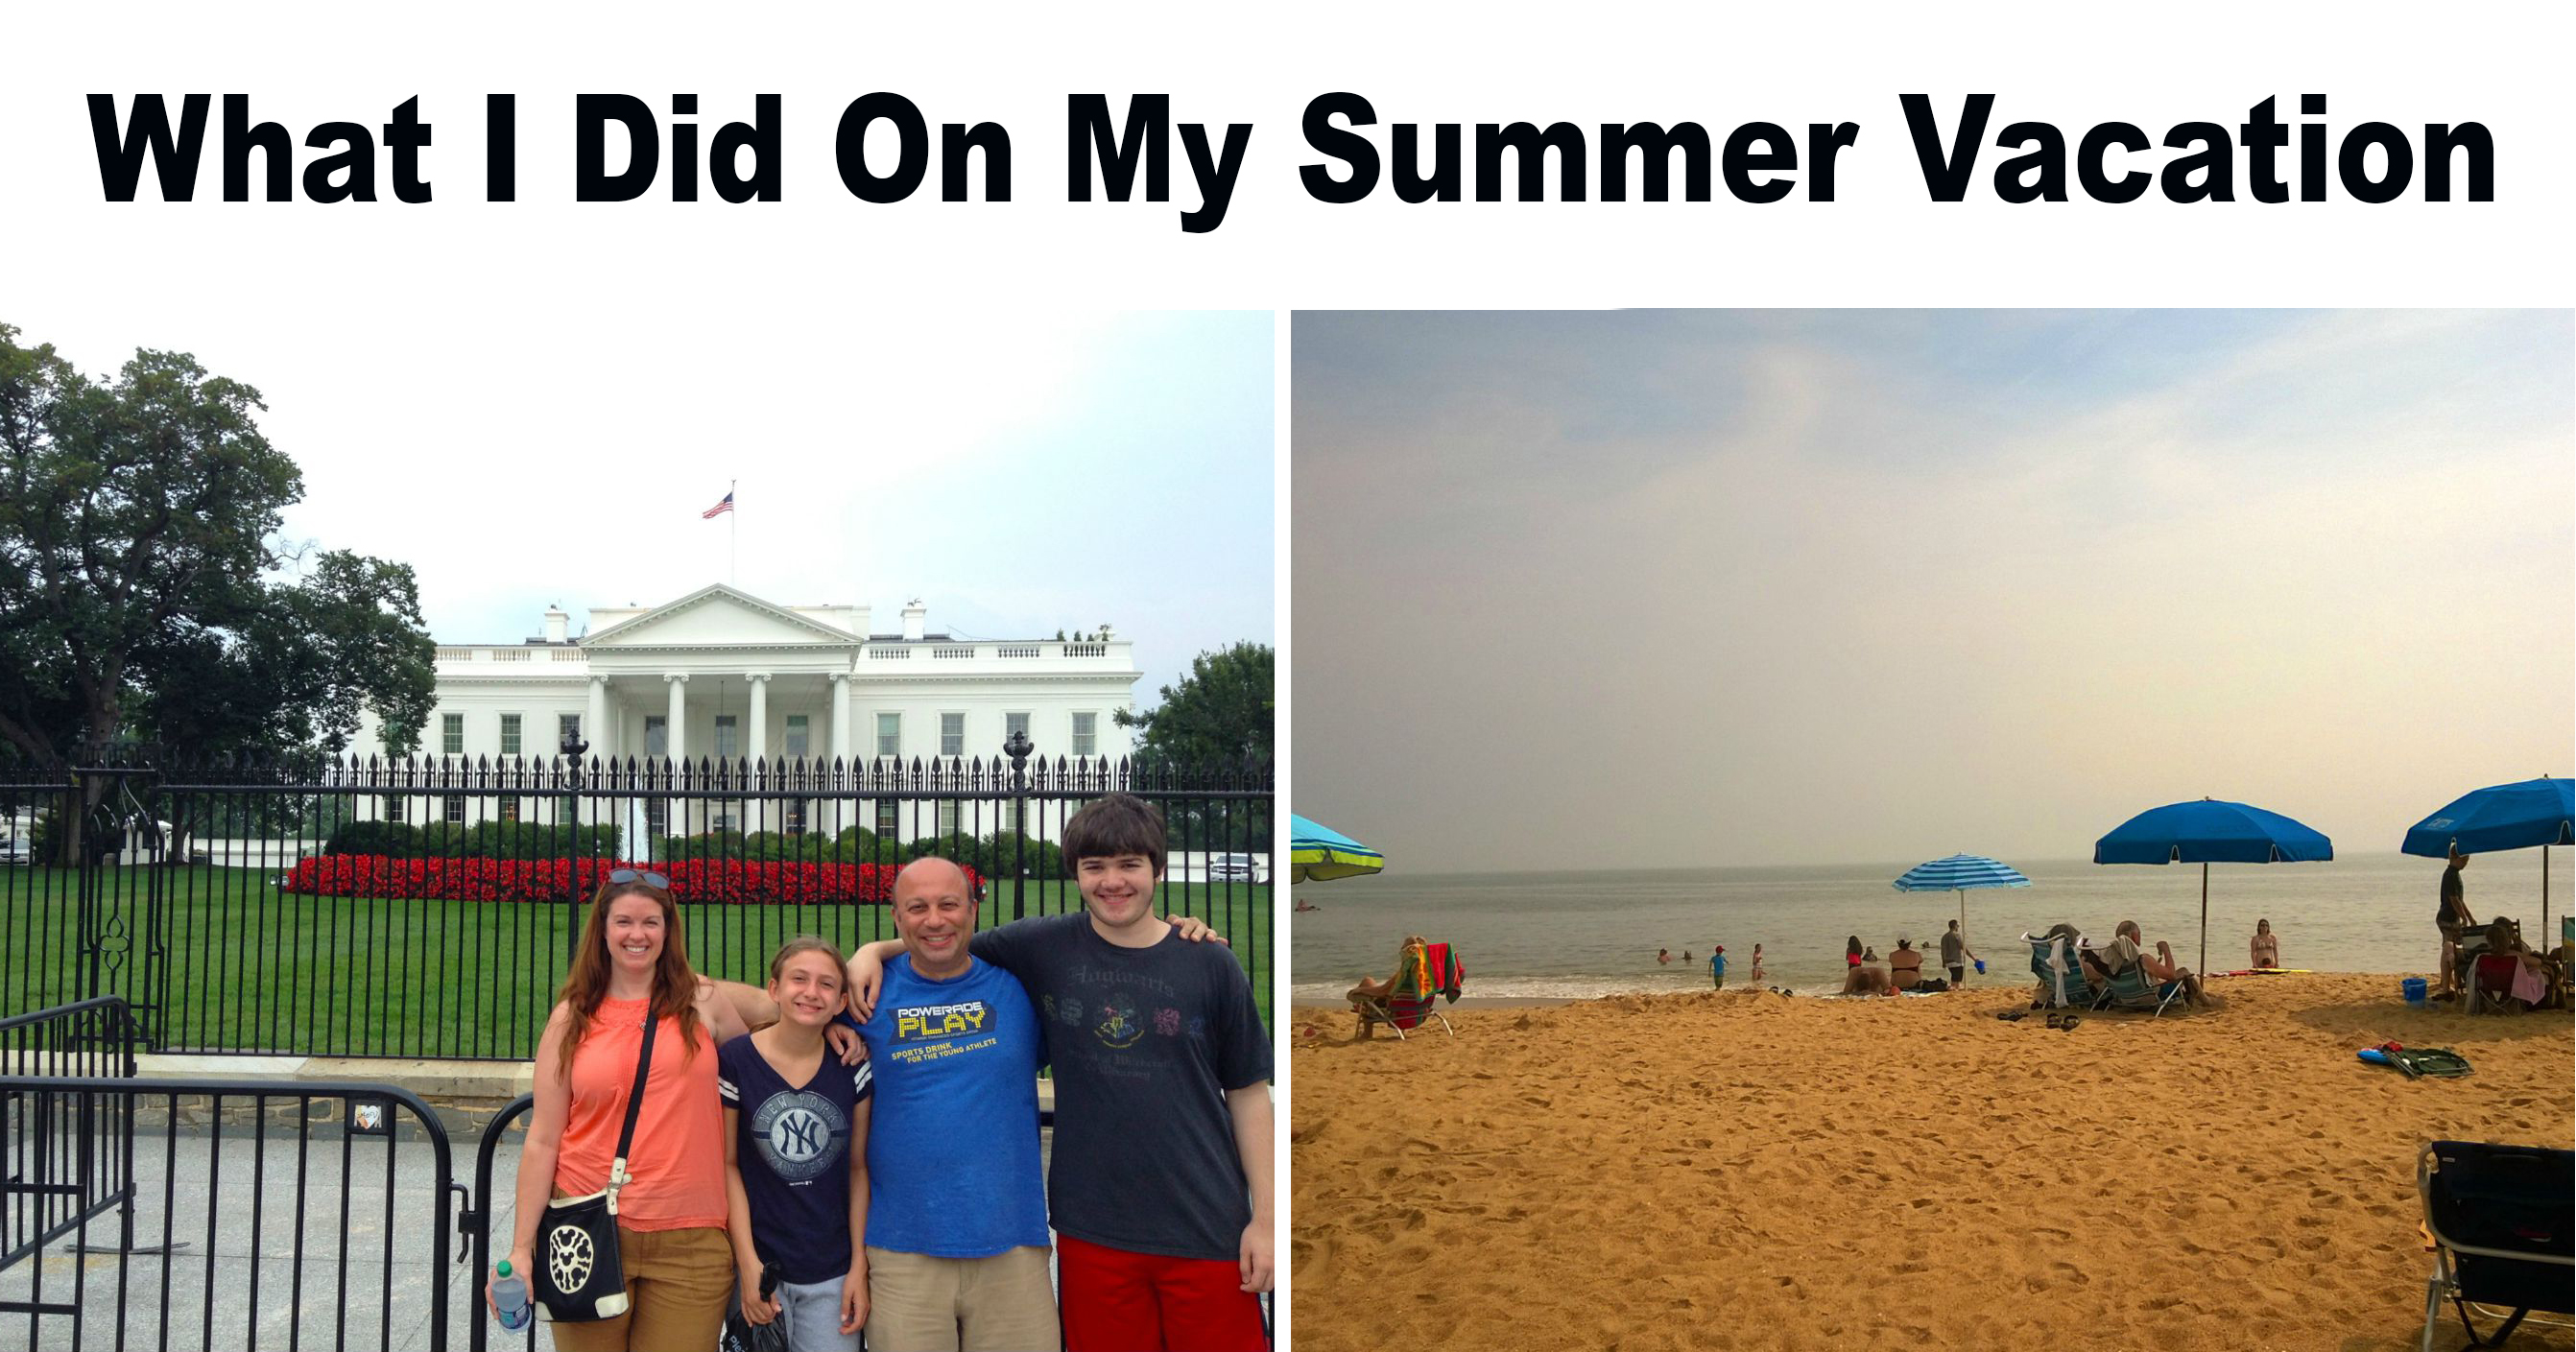 what i did on my summer vacation